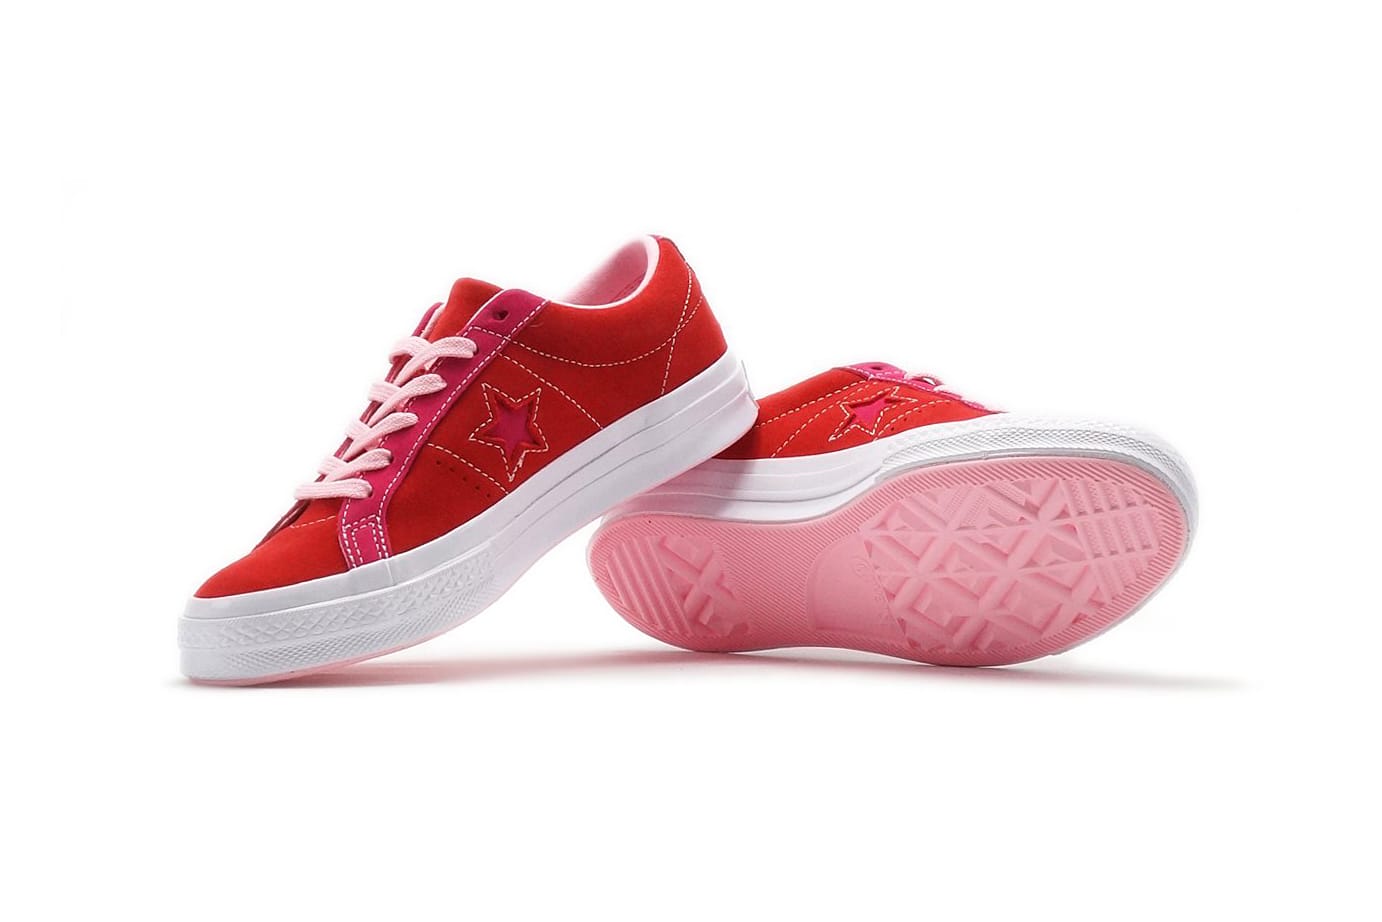 Converse One Star Carnival Enamel Red 